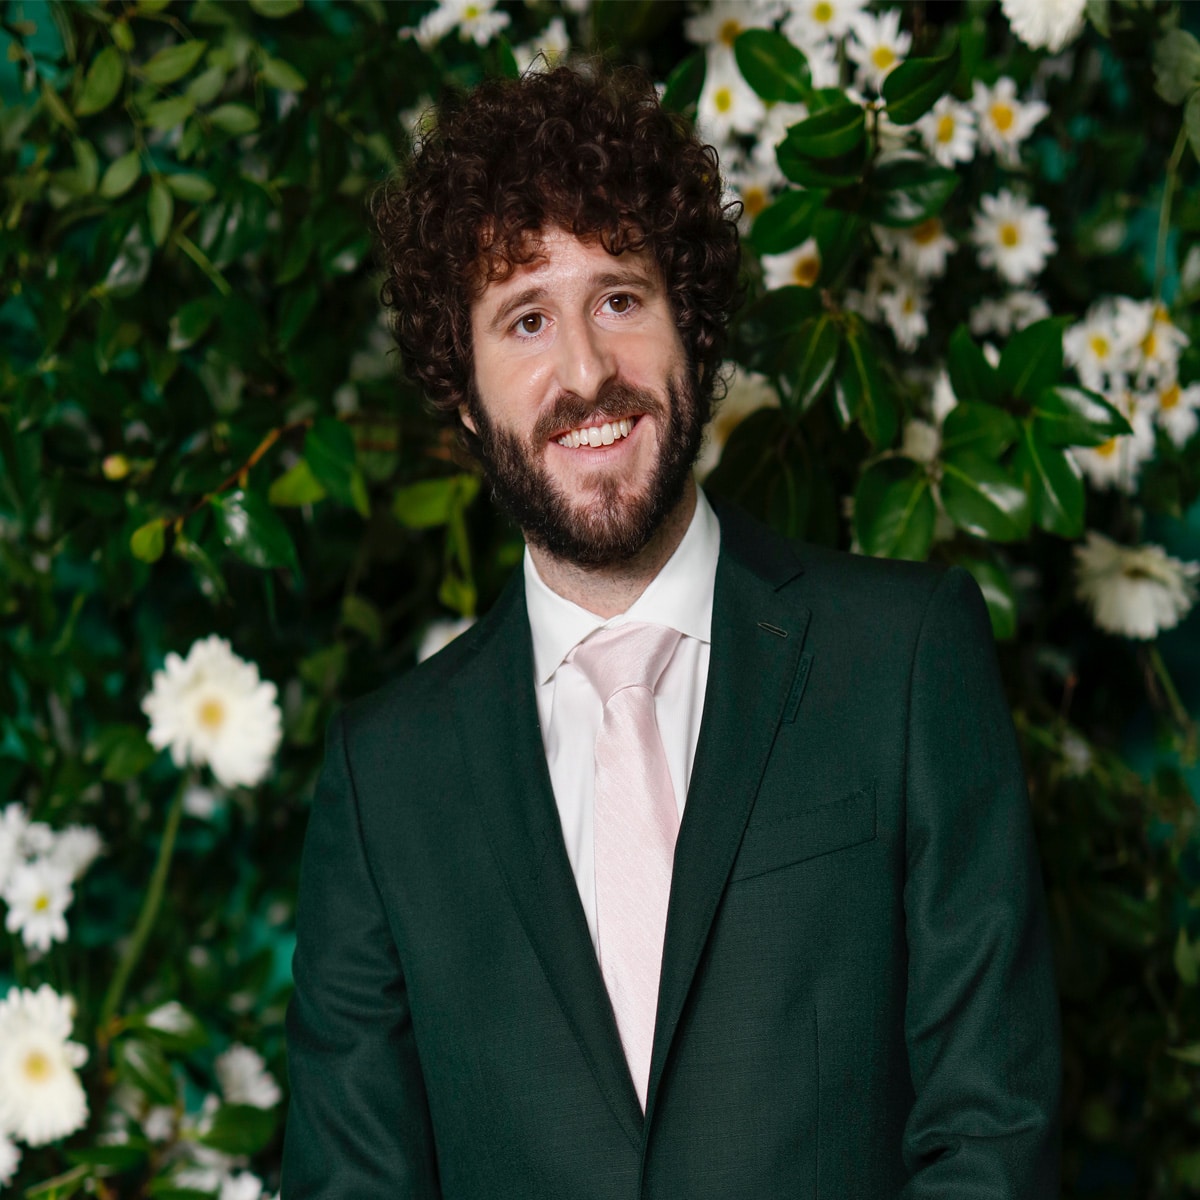 rapper lil dicky attends the premiere of fxx's dave